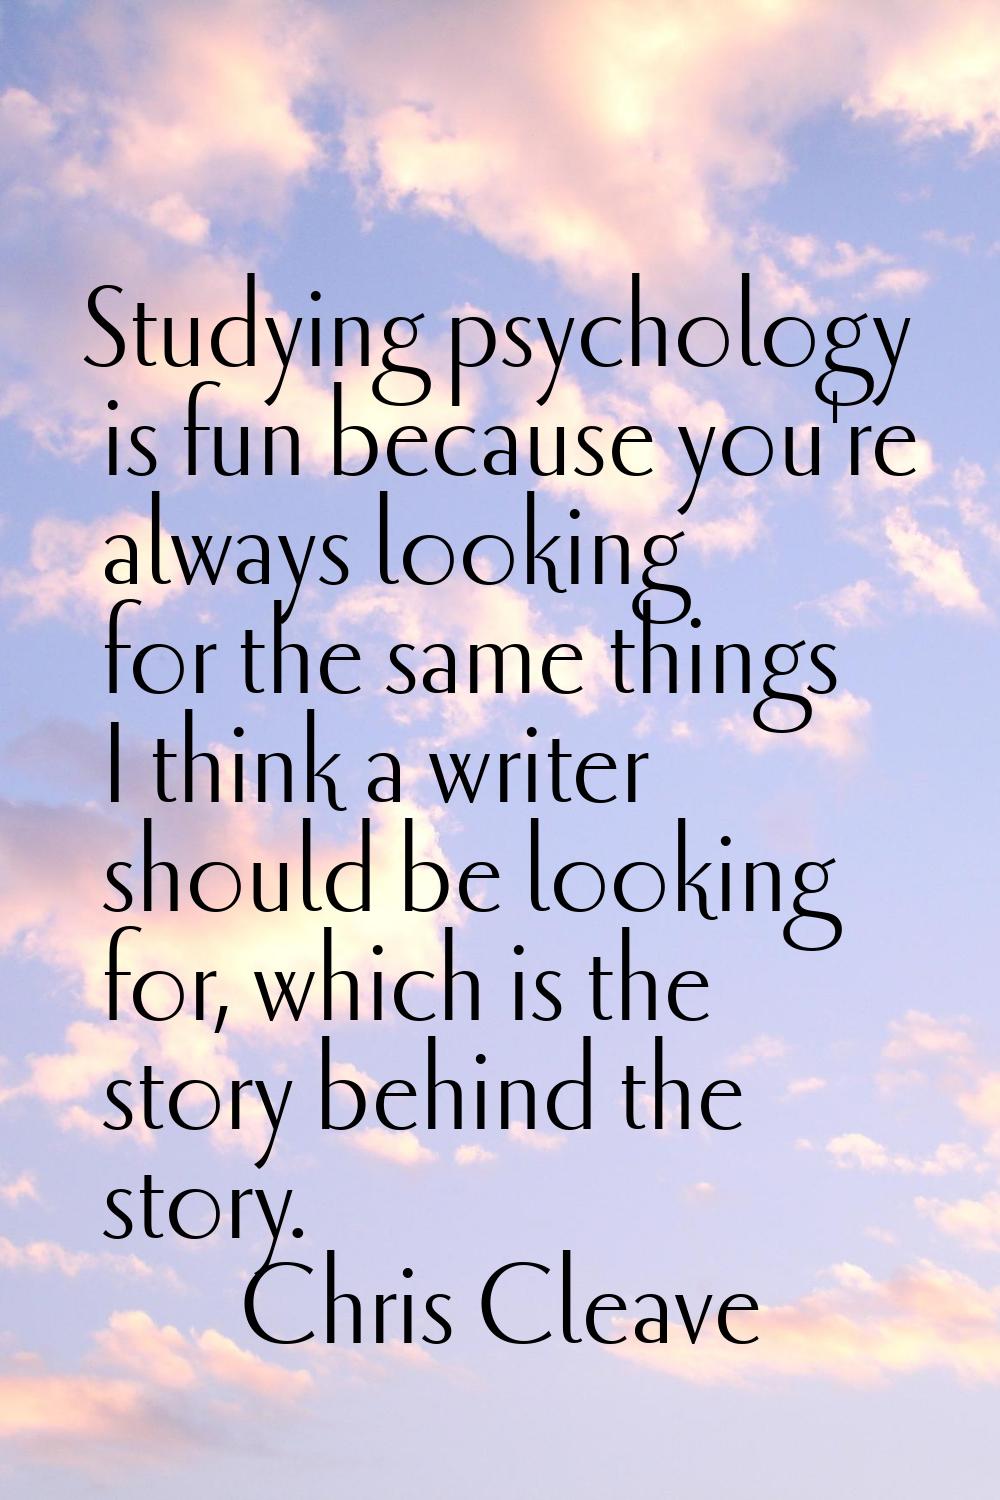 Studying psychology is fun because you're always looking for the same things I think a writer shoul